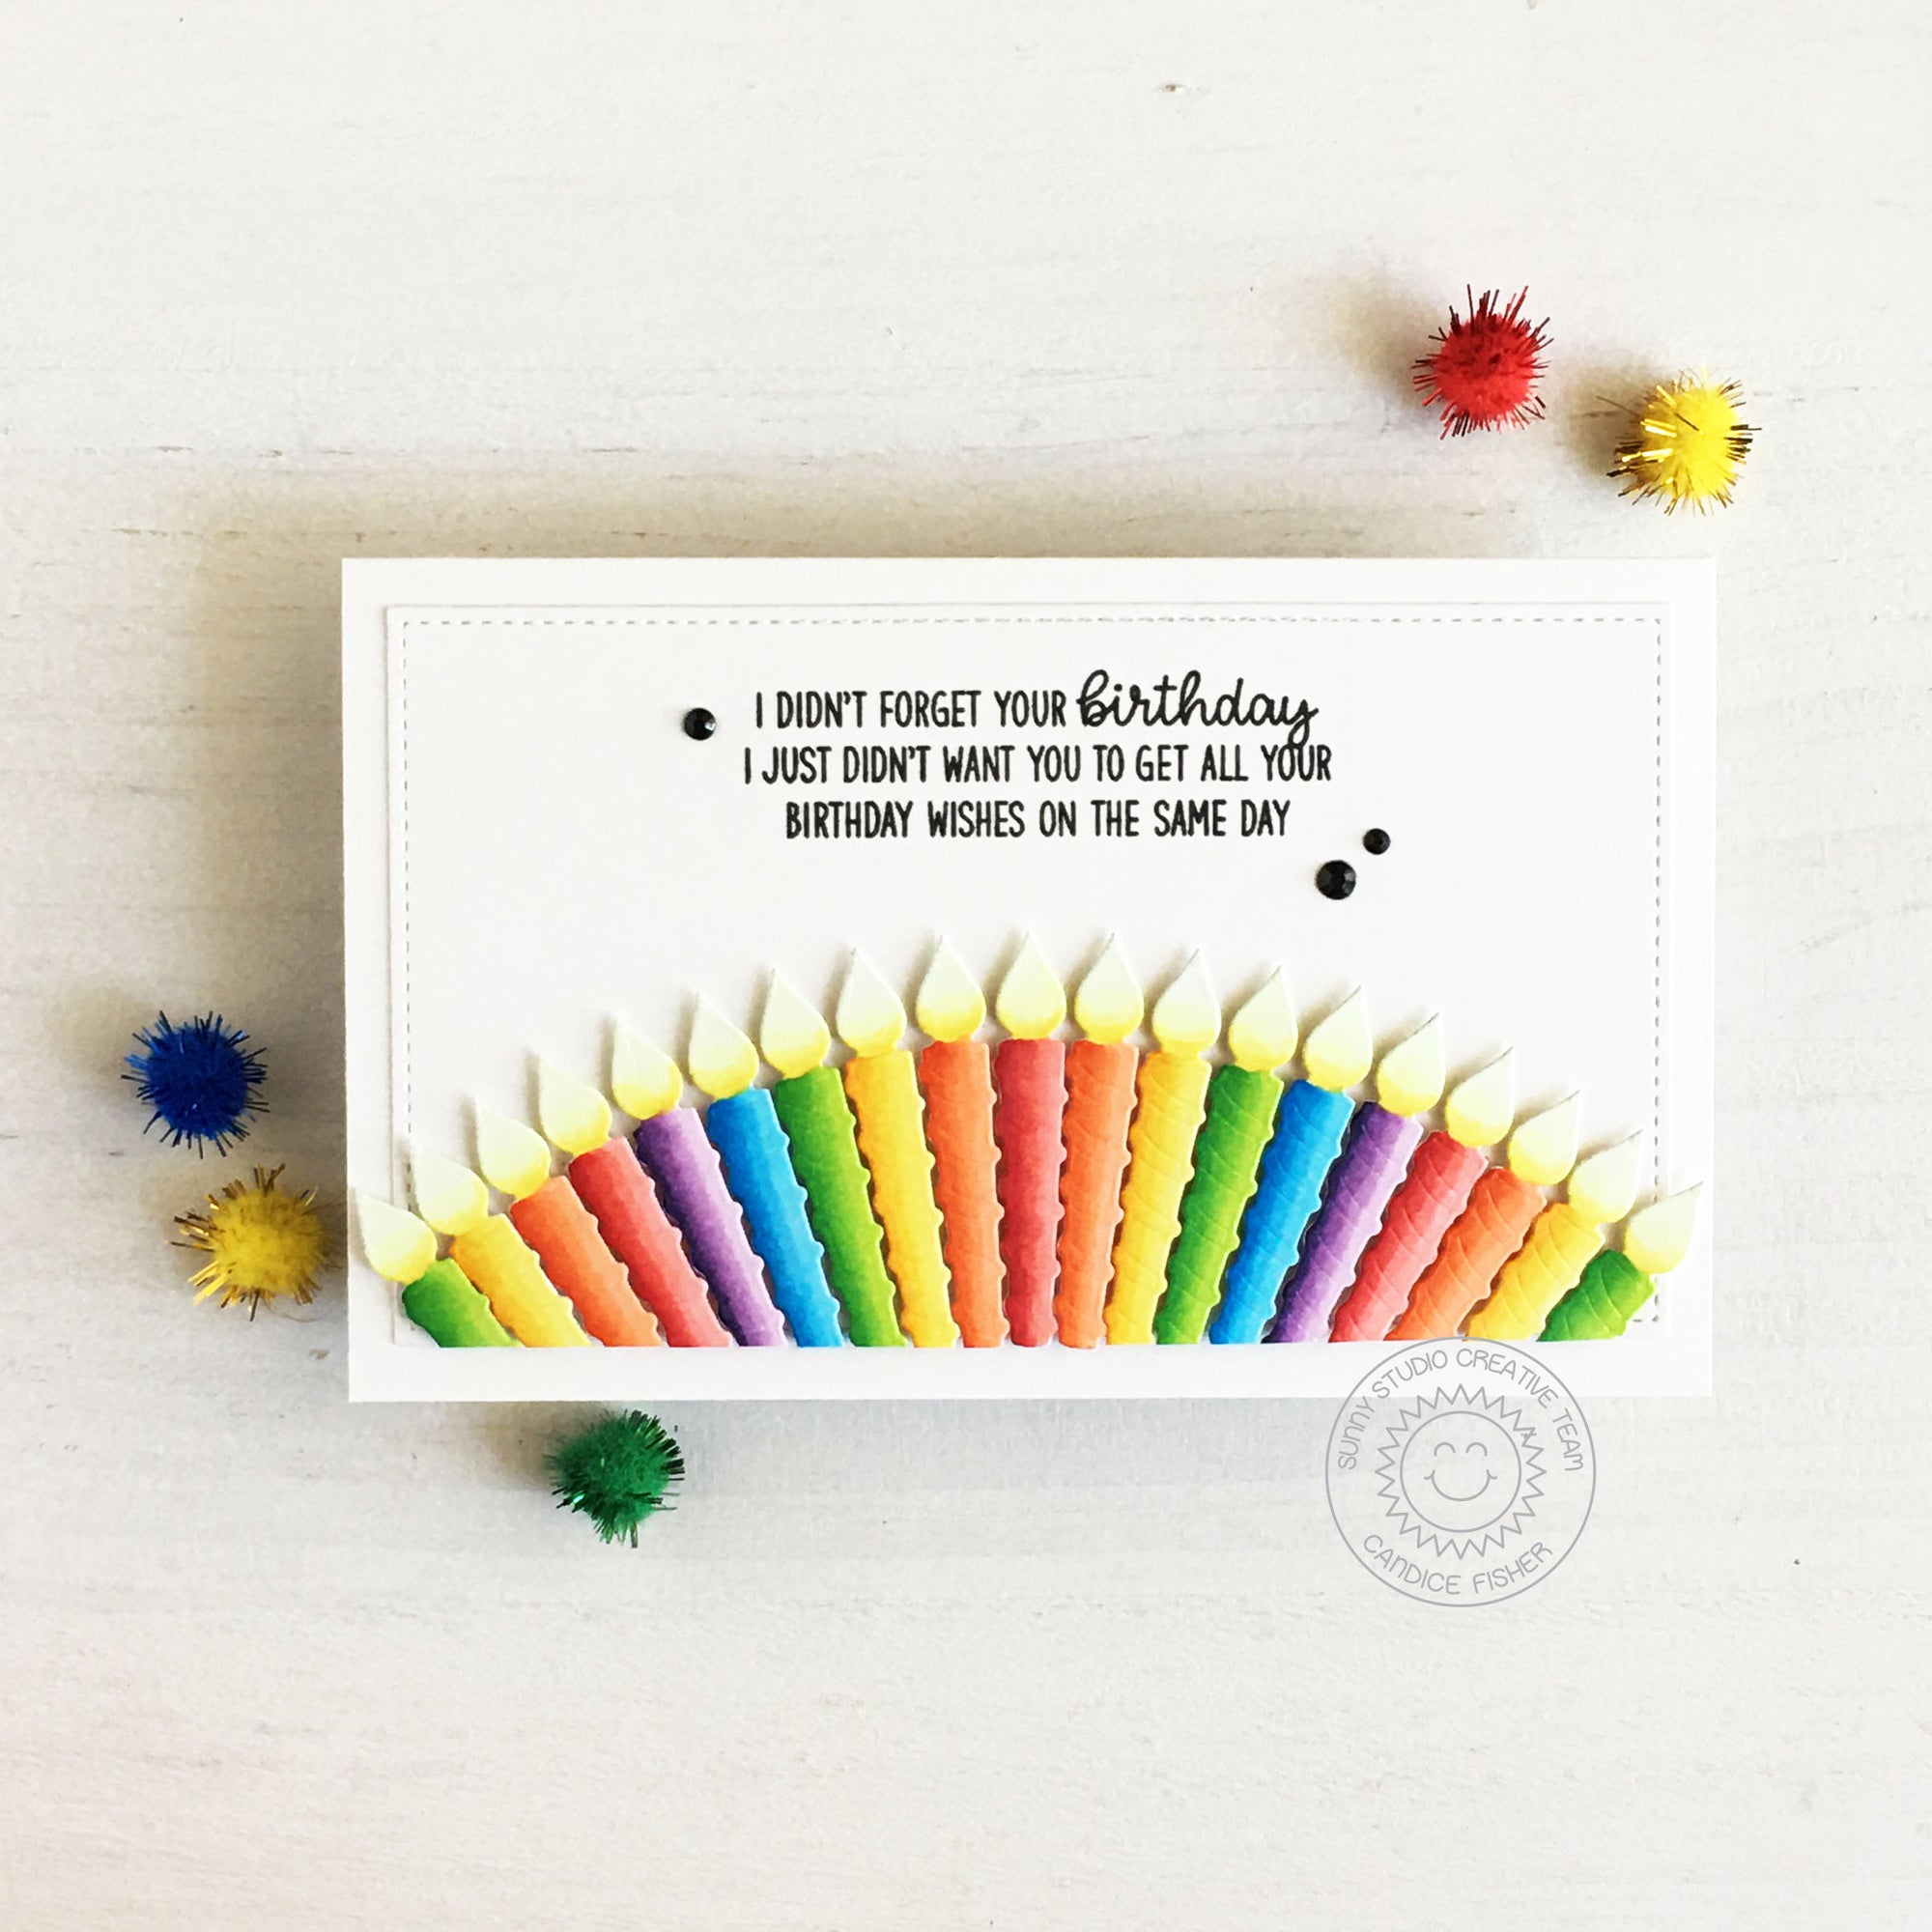 Sunny Studio Stamps Belated Birthday Rainbow Arched Candle Slimline Card (using Cupcake Shape A2 Sized Metal Cutting Dies)